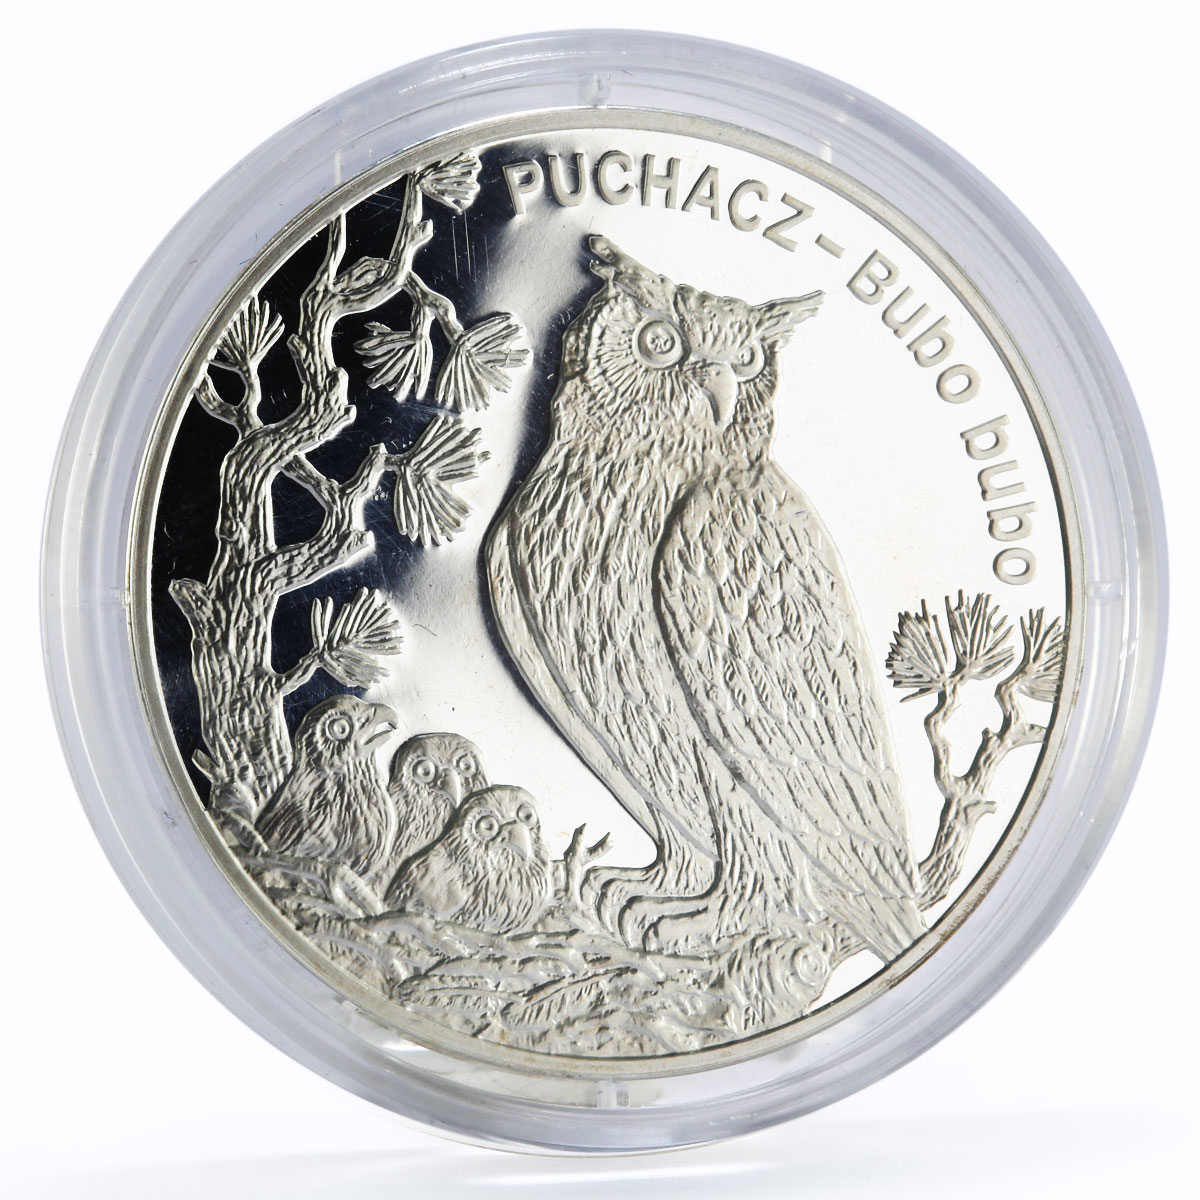 Poland 20 zlotych Endangered Wildlife series Eagle Owl proof silver coin 2005